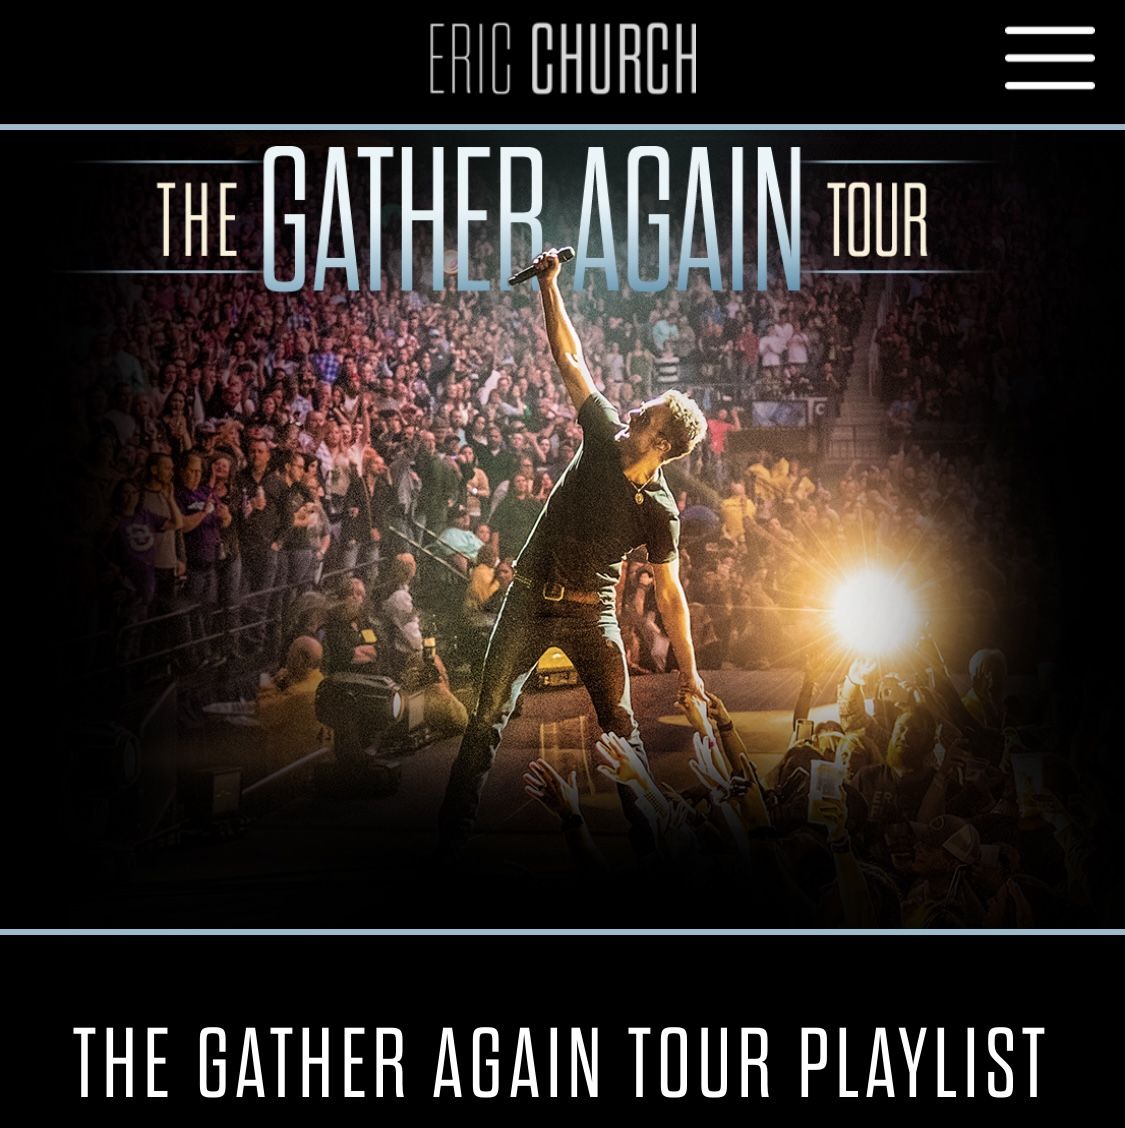 4 Eric Church Tickets For Sale - AMAZING SEATS